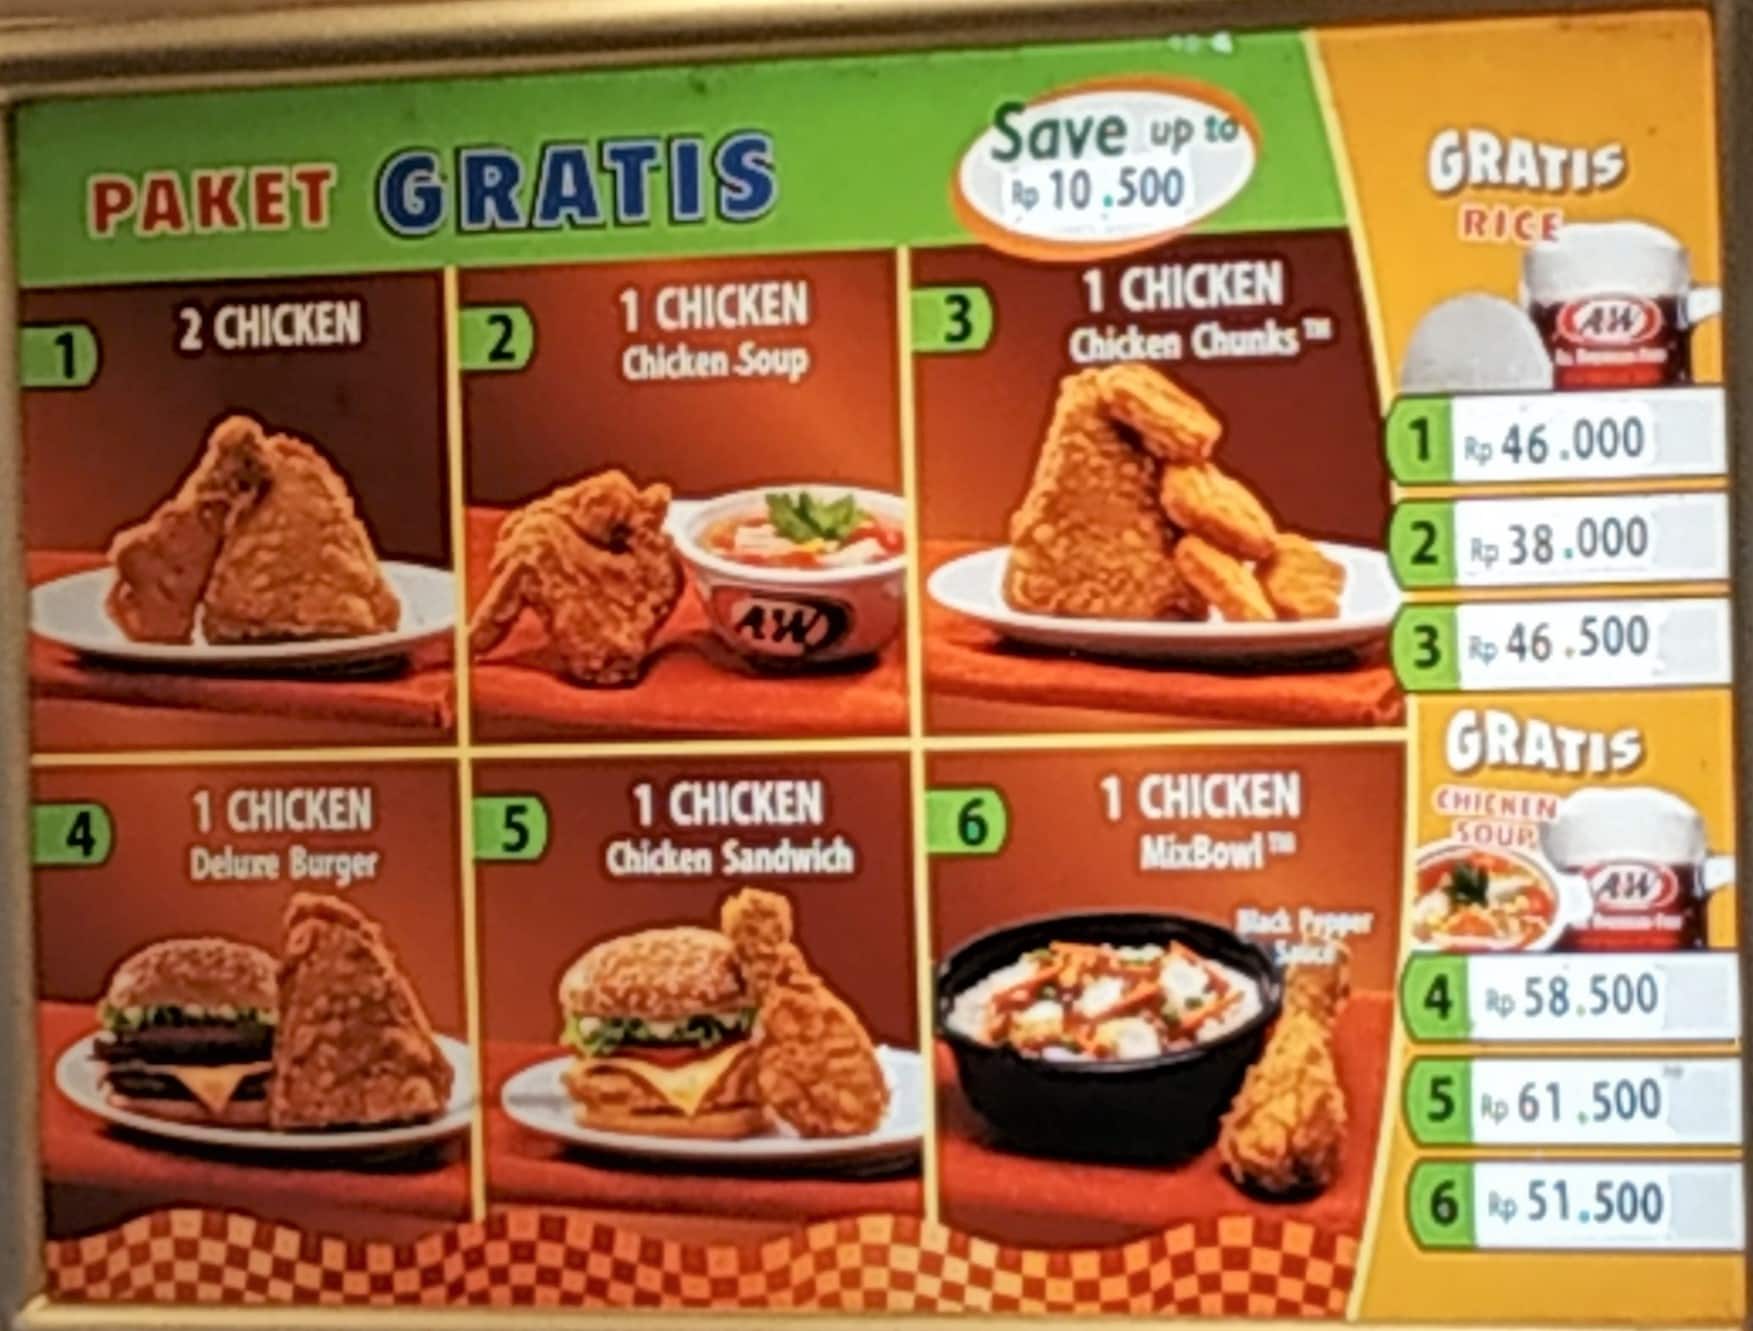 A&w delivery near me